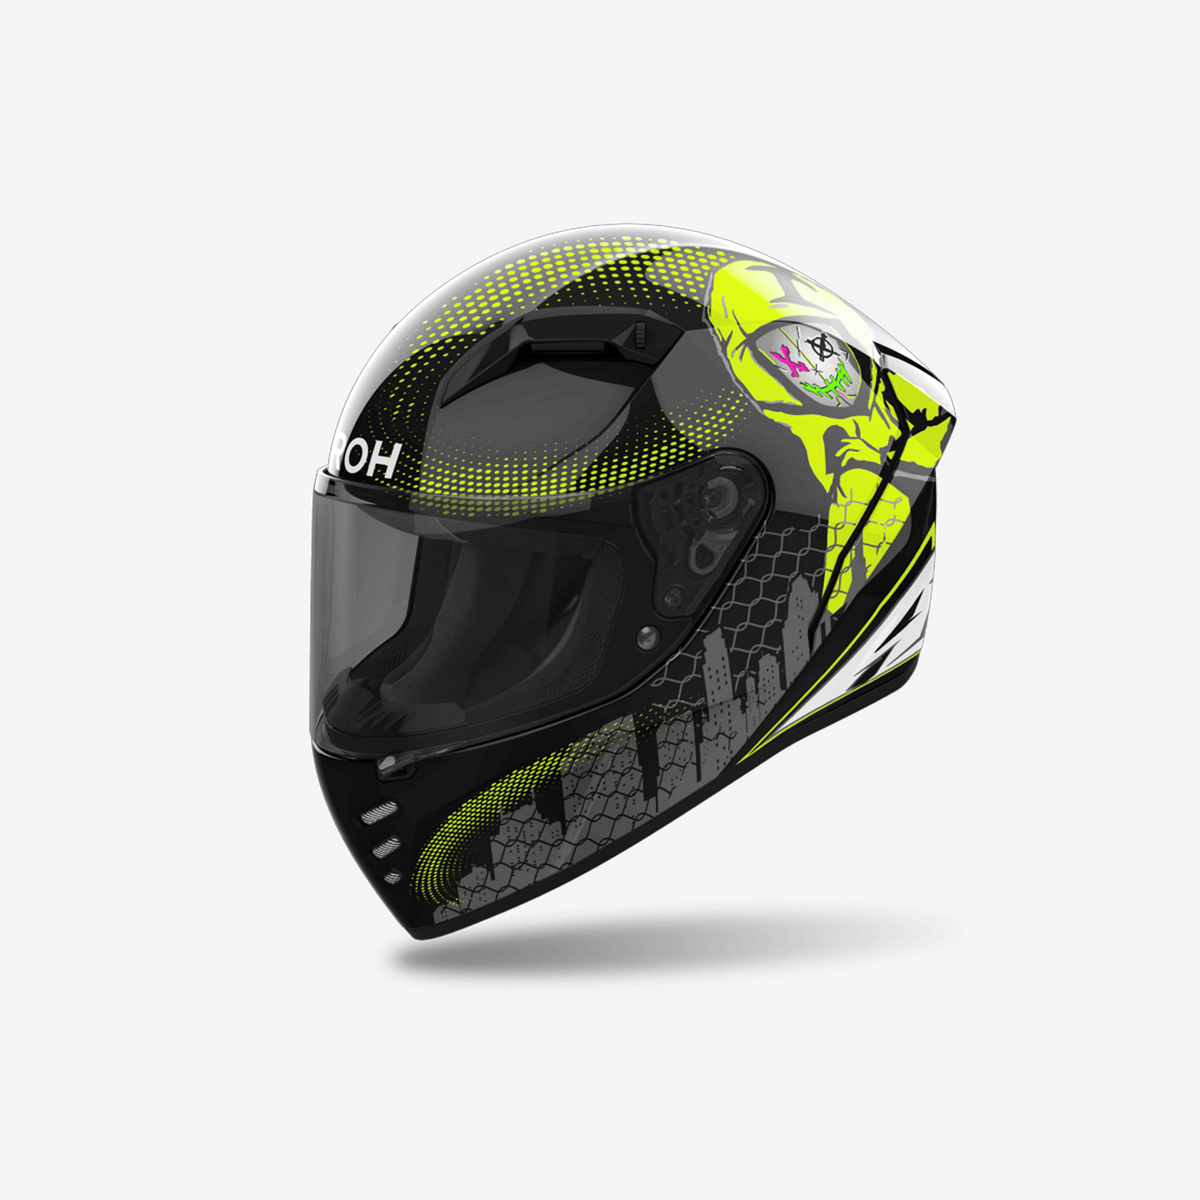 AIROH CONNOR GAMER full-face road motorcycle helmet